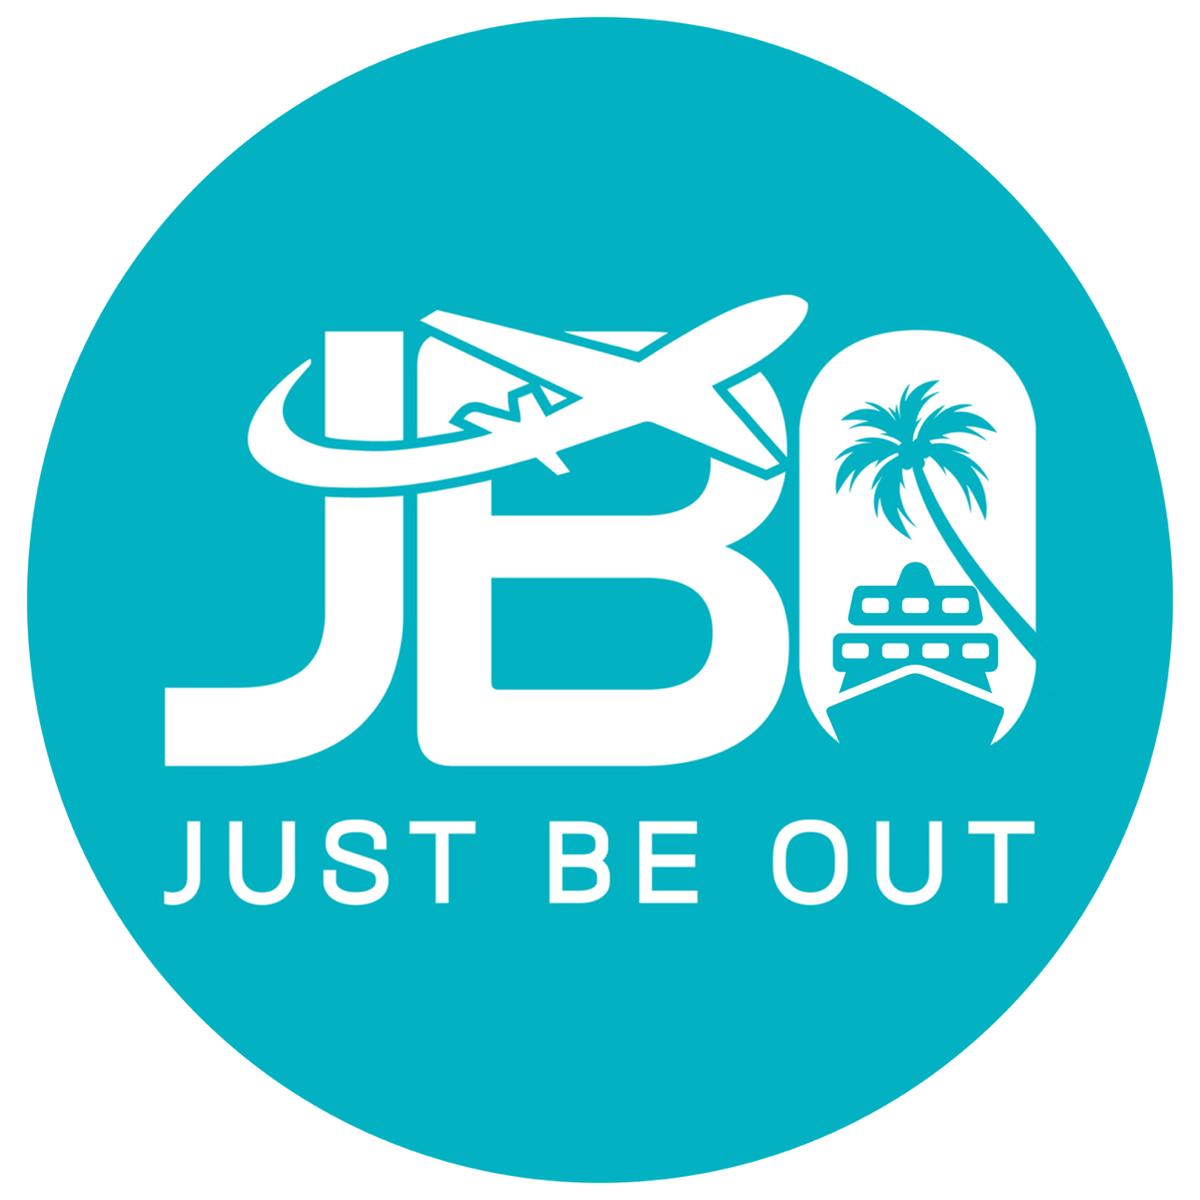 Just Be Out's images